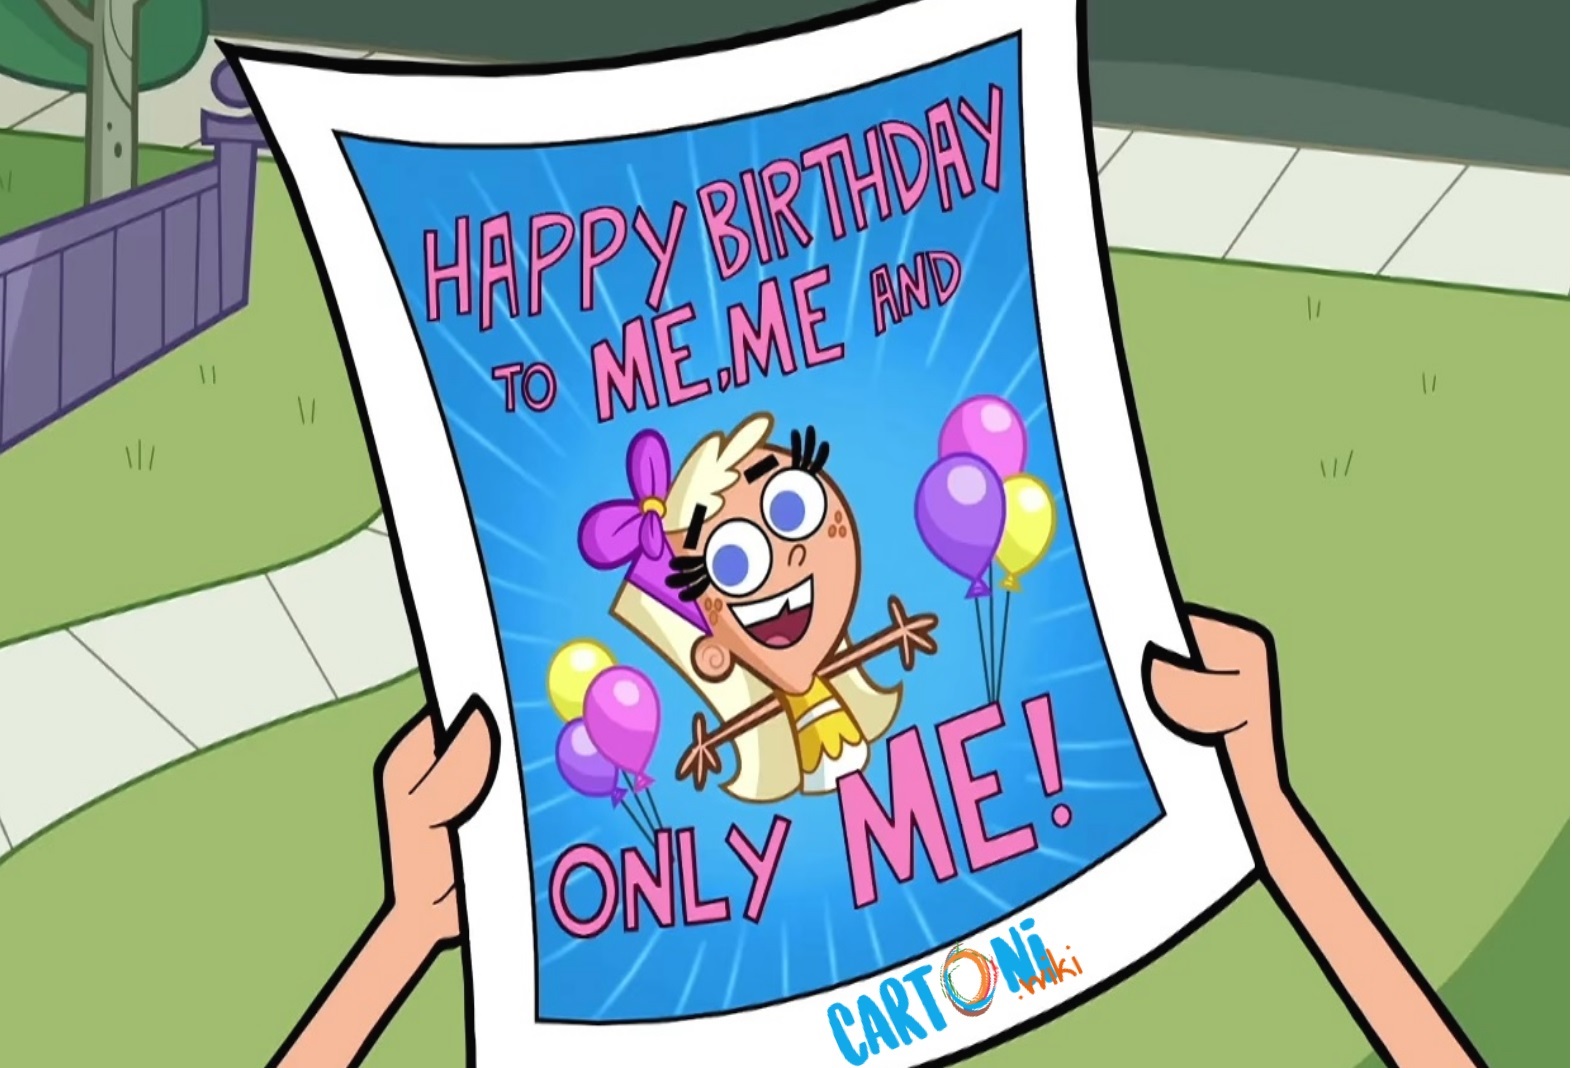 My birthday with the fairly oddparents